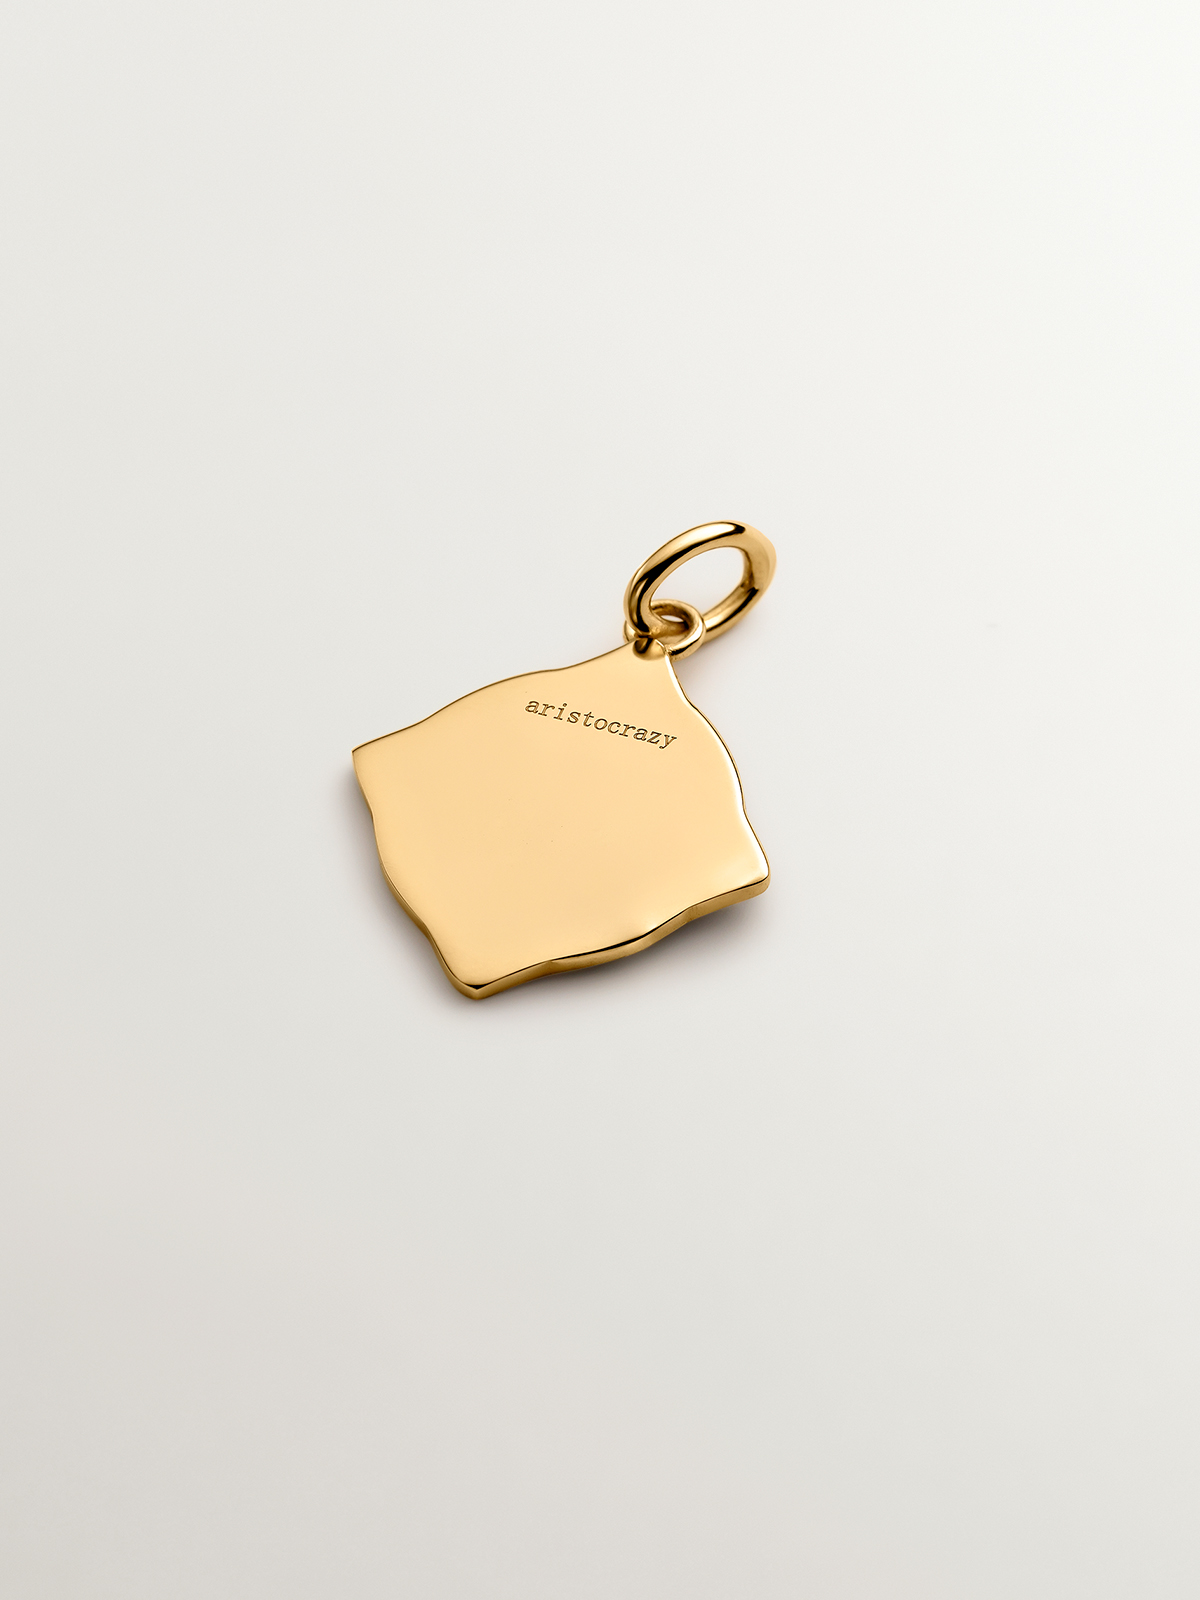 18K yellow gold plated 925 sterling silver charm with initial A and white enamel with irregular diamond shape